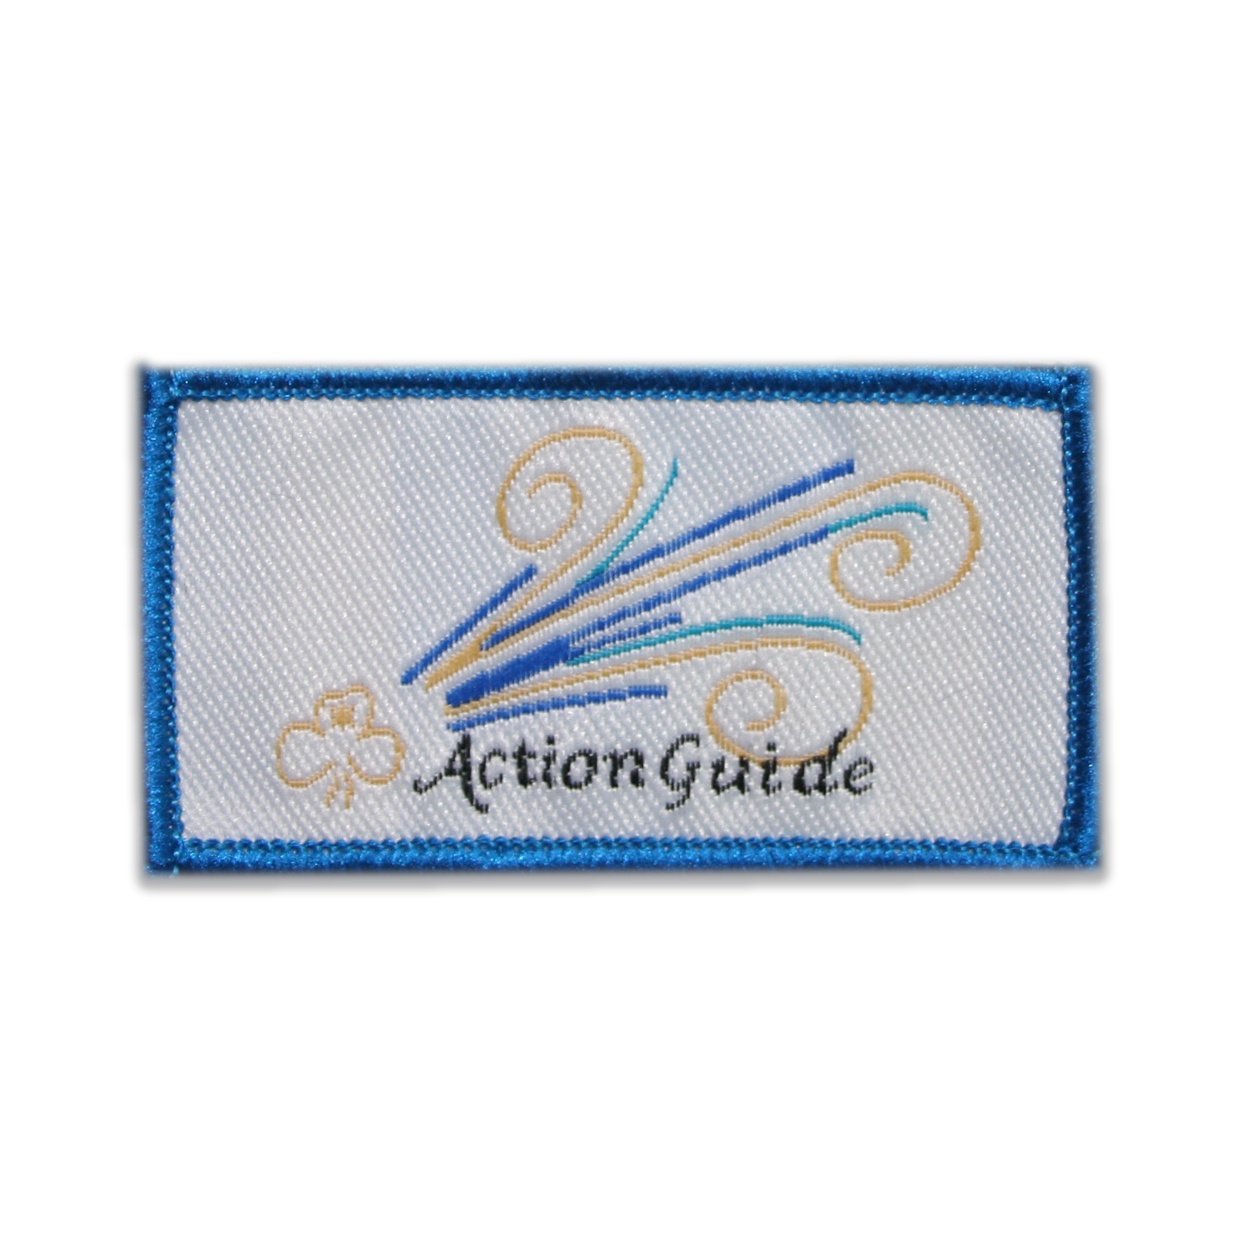 Action Guide - Blue